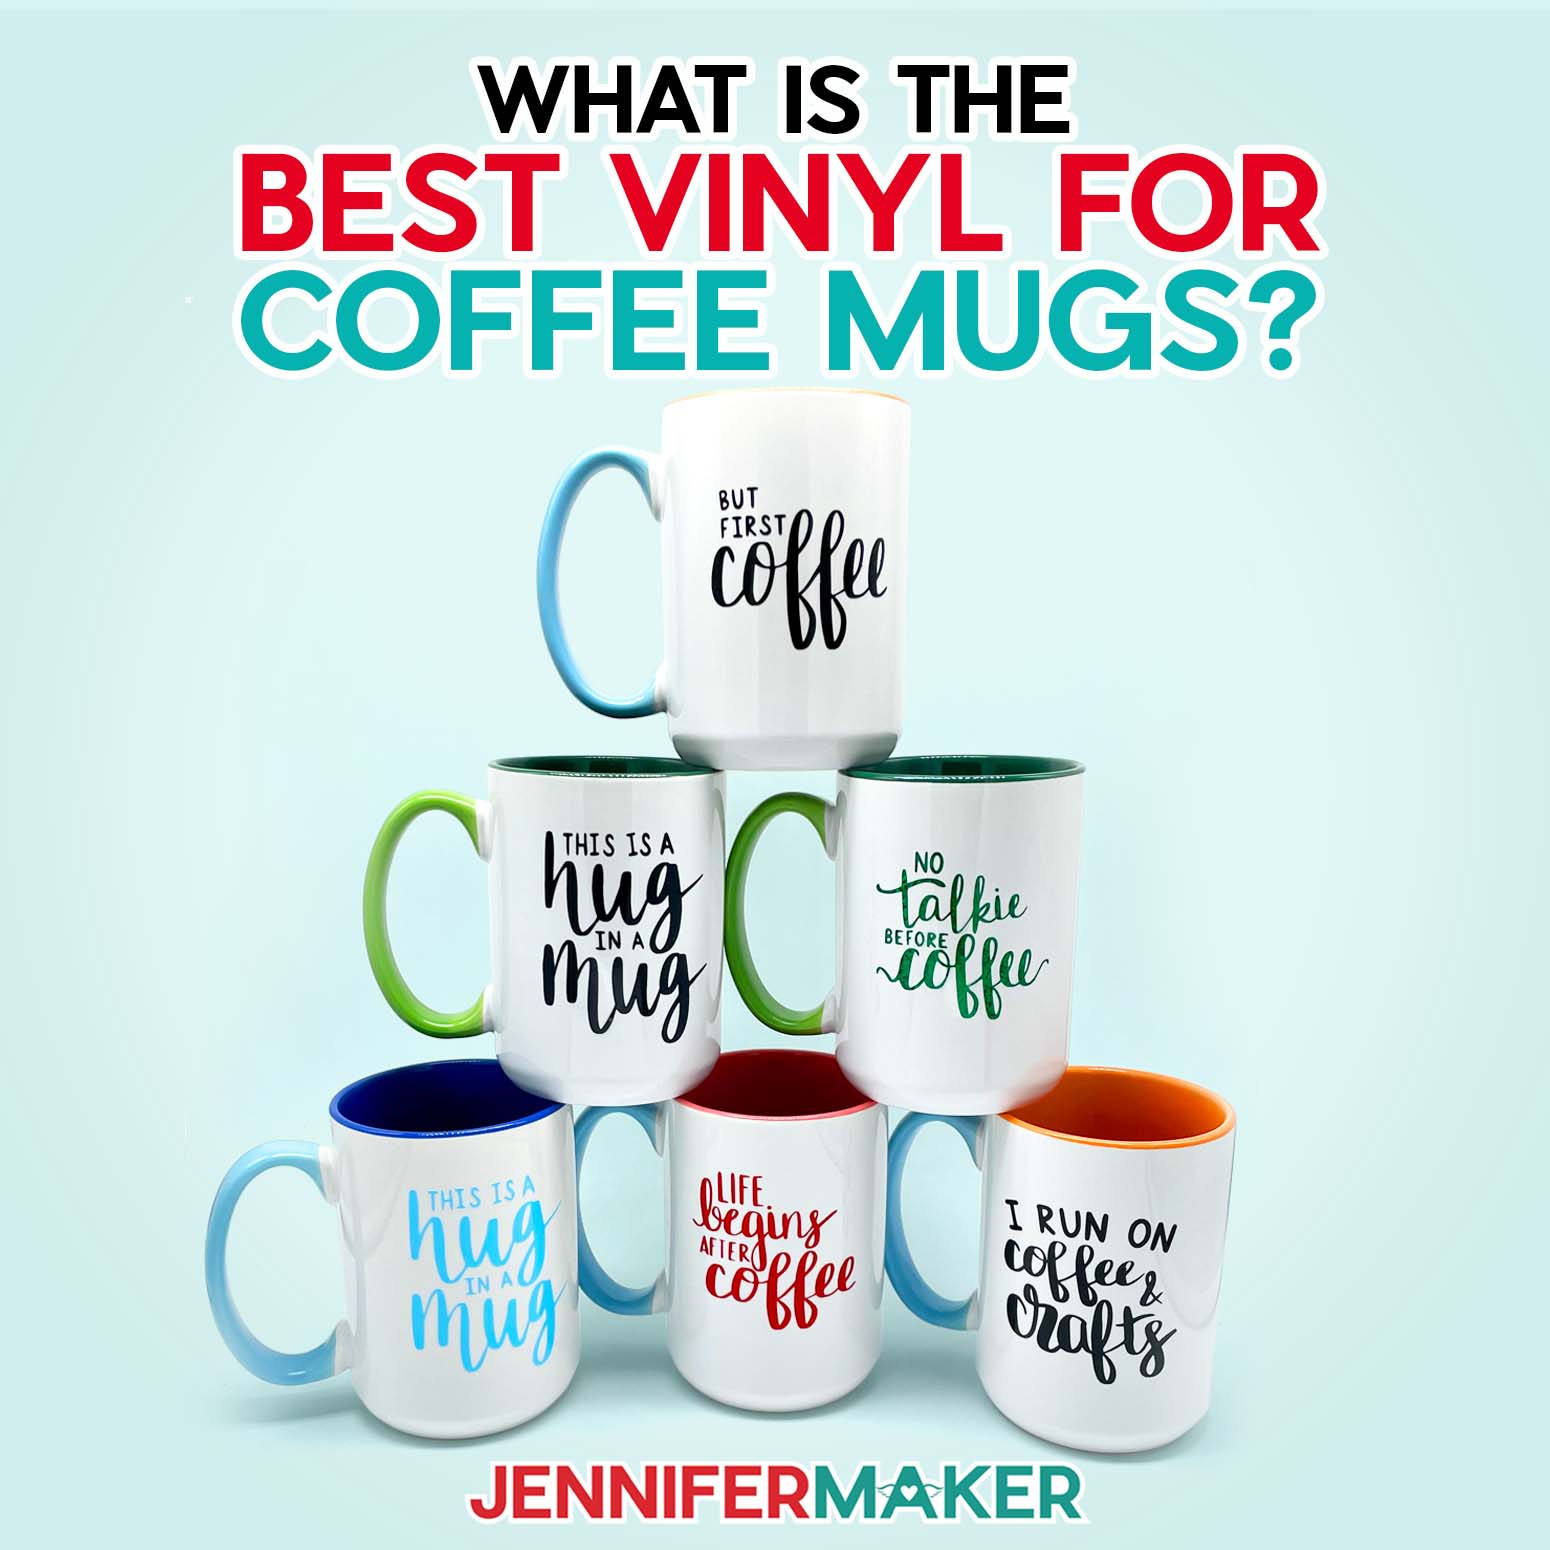 What is the best Cricut vinyl for coffee mugs? Find out with JenniferMaker's new tutorial! Stack of vinyl-decorated mugs with cute coffee-related sayings, stacked up on a light blue surface. Each mug has a different colored handle and a different brush-lettered, vinyl cut quote.